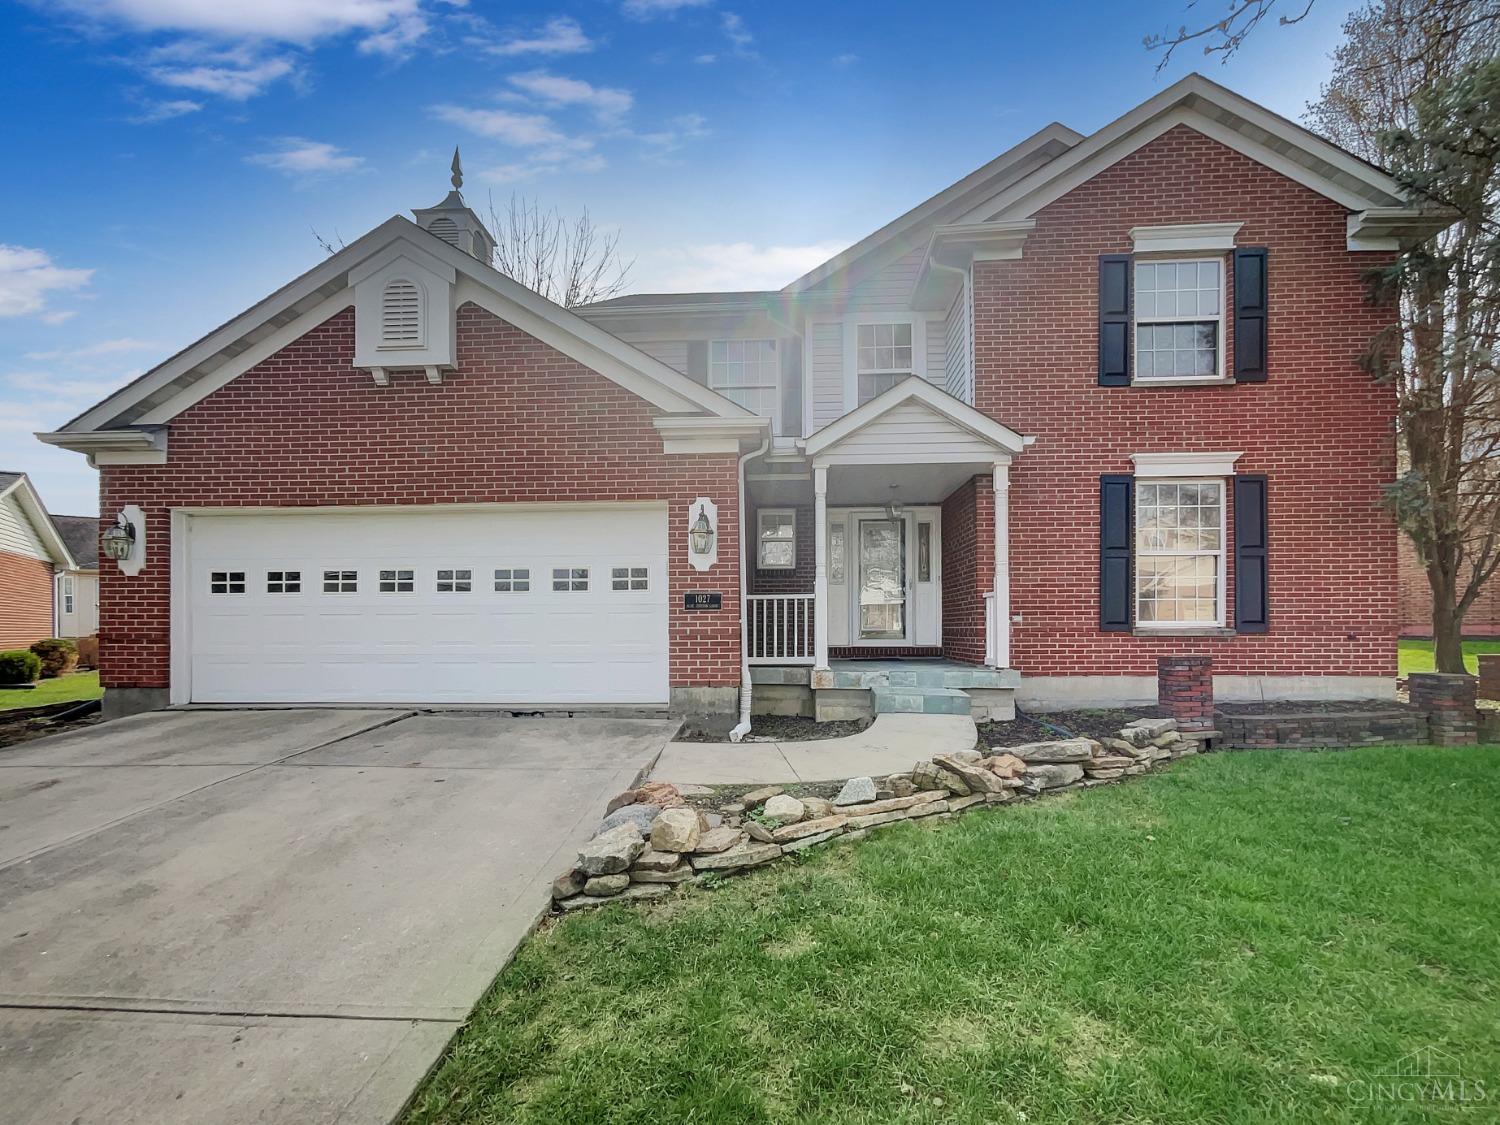 1027 Olde Station Ct, Fairfield, OH 45014